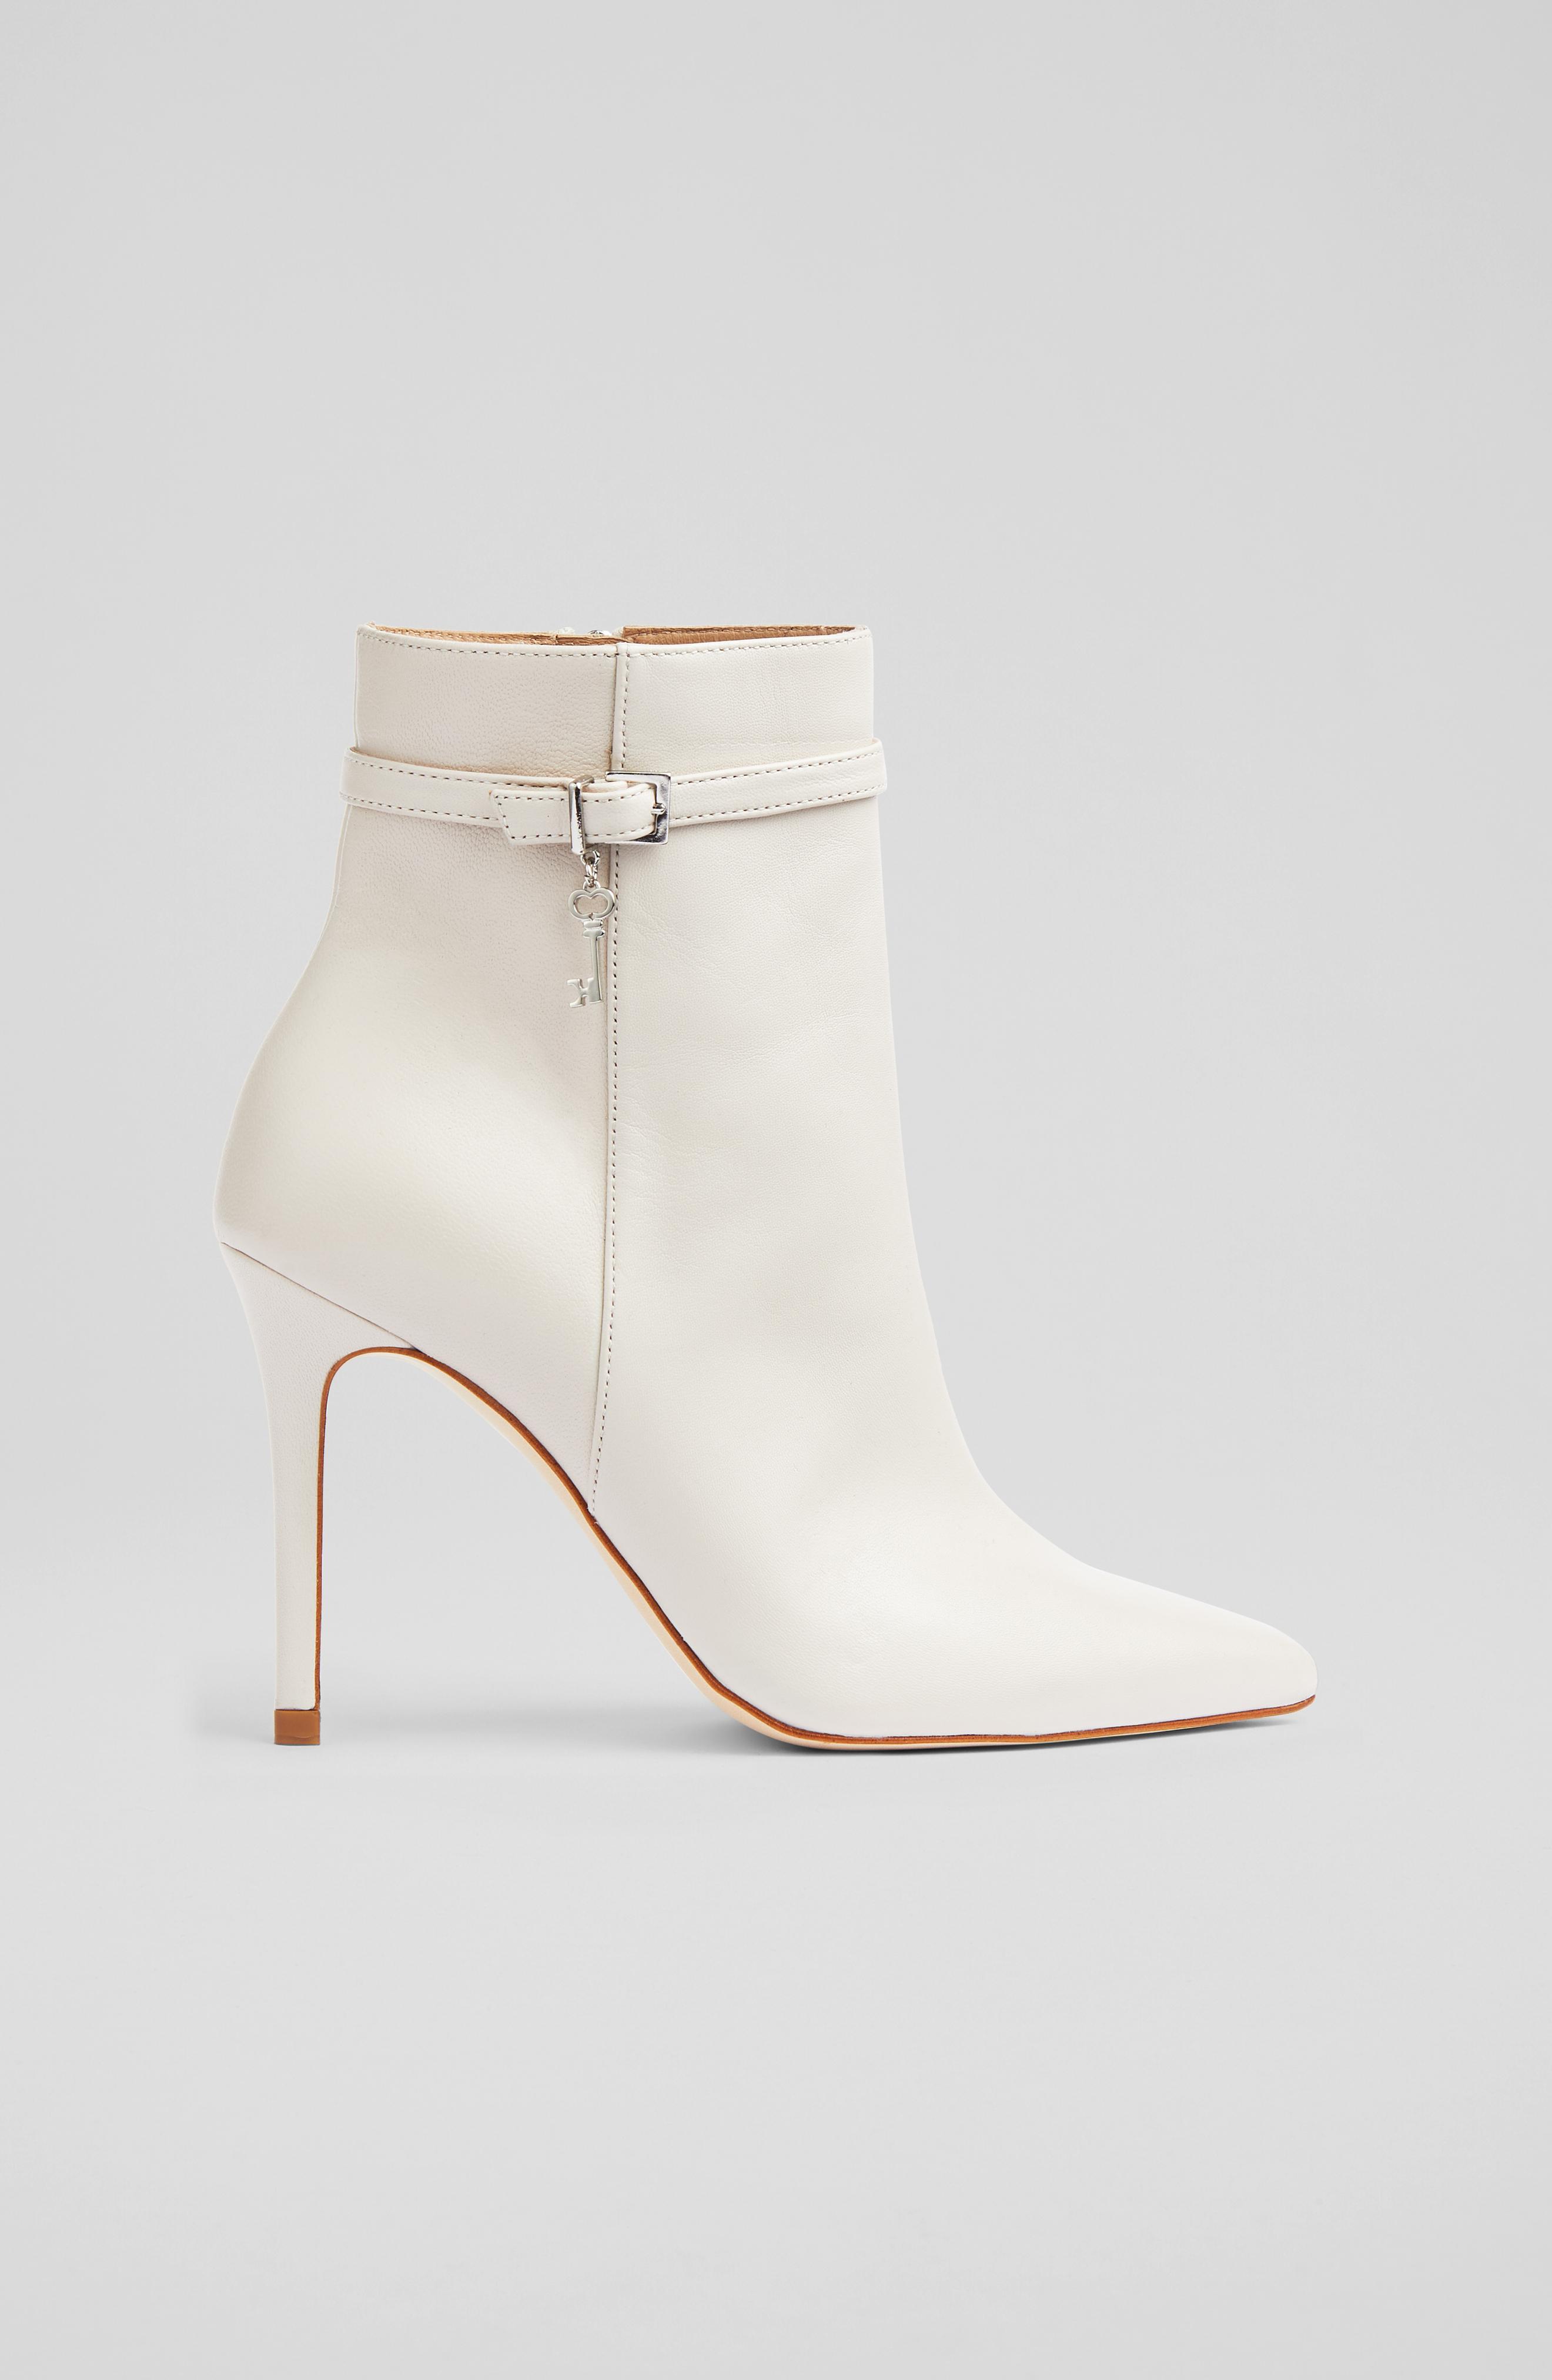 L.K.Bennett Clover Cream Leather Ankle Boots, Neutral